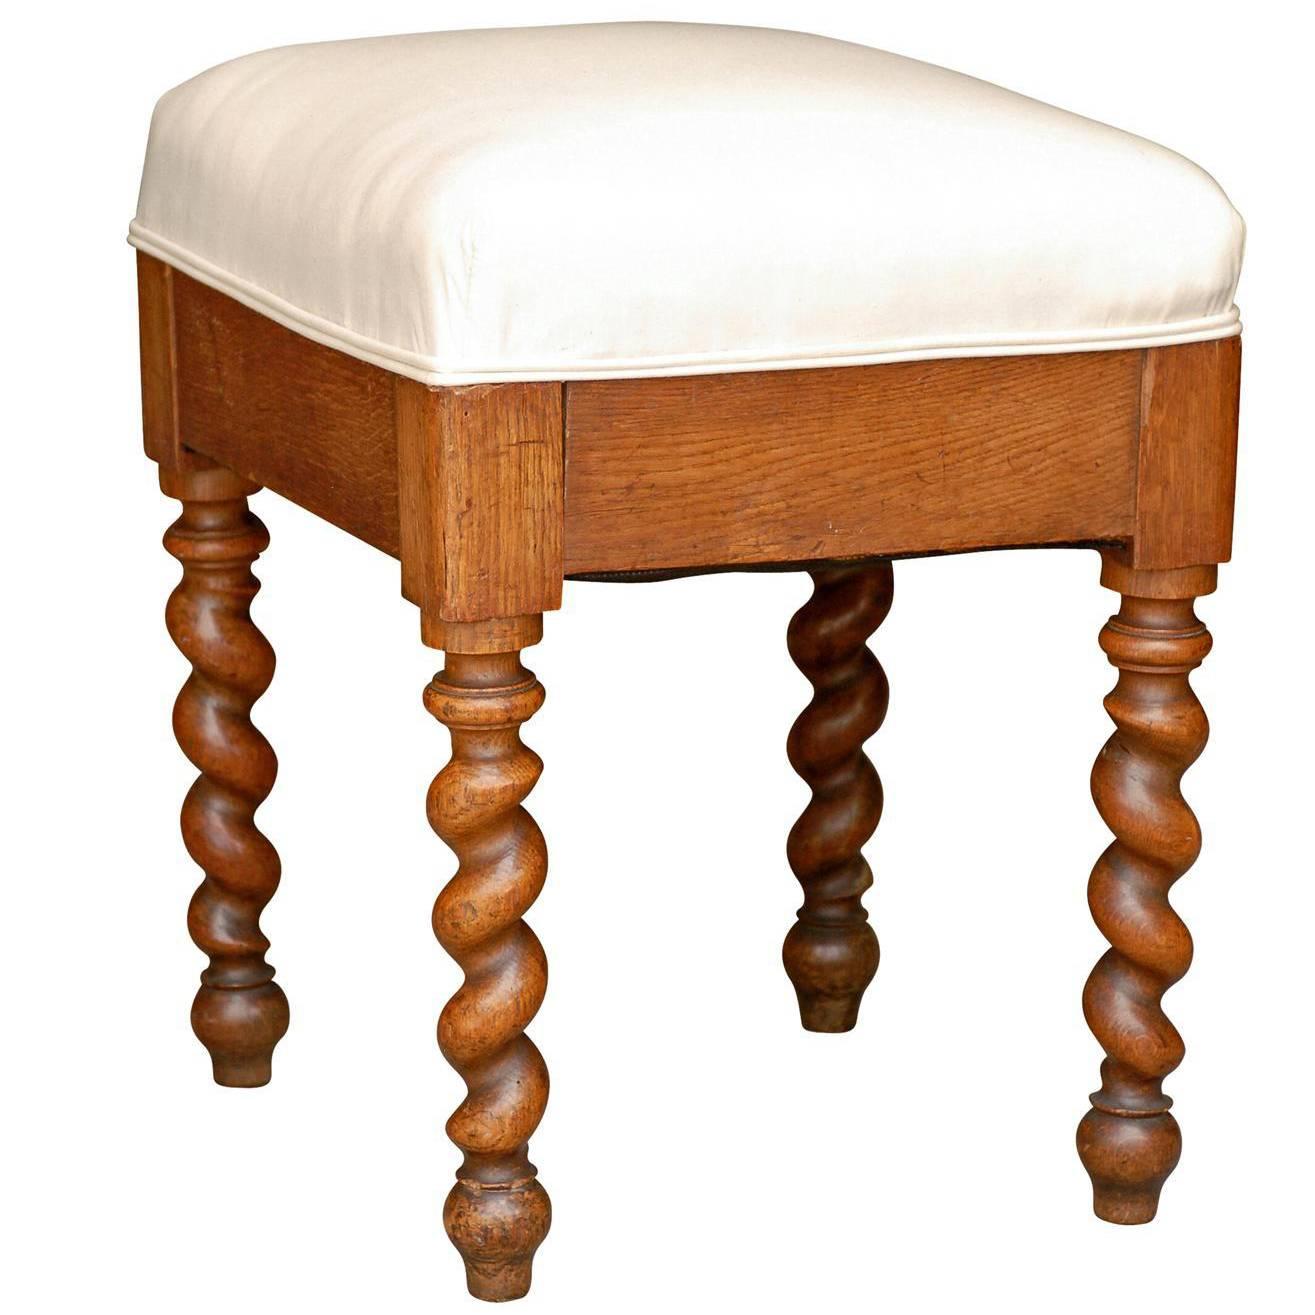 French Wooden Barley Twist Stool with Upholstered Seat, Late 19th Century For Sale